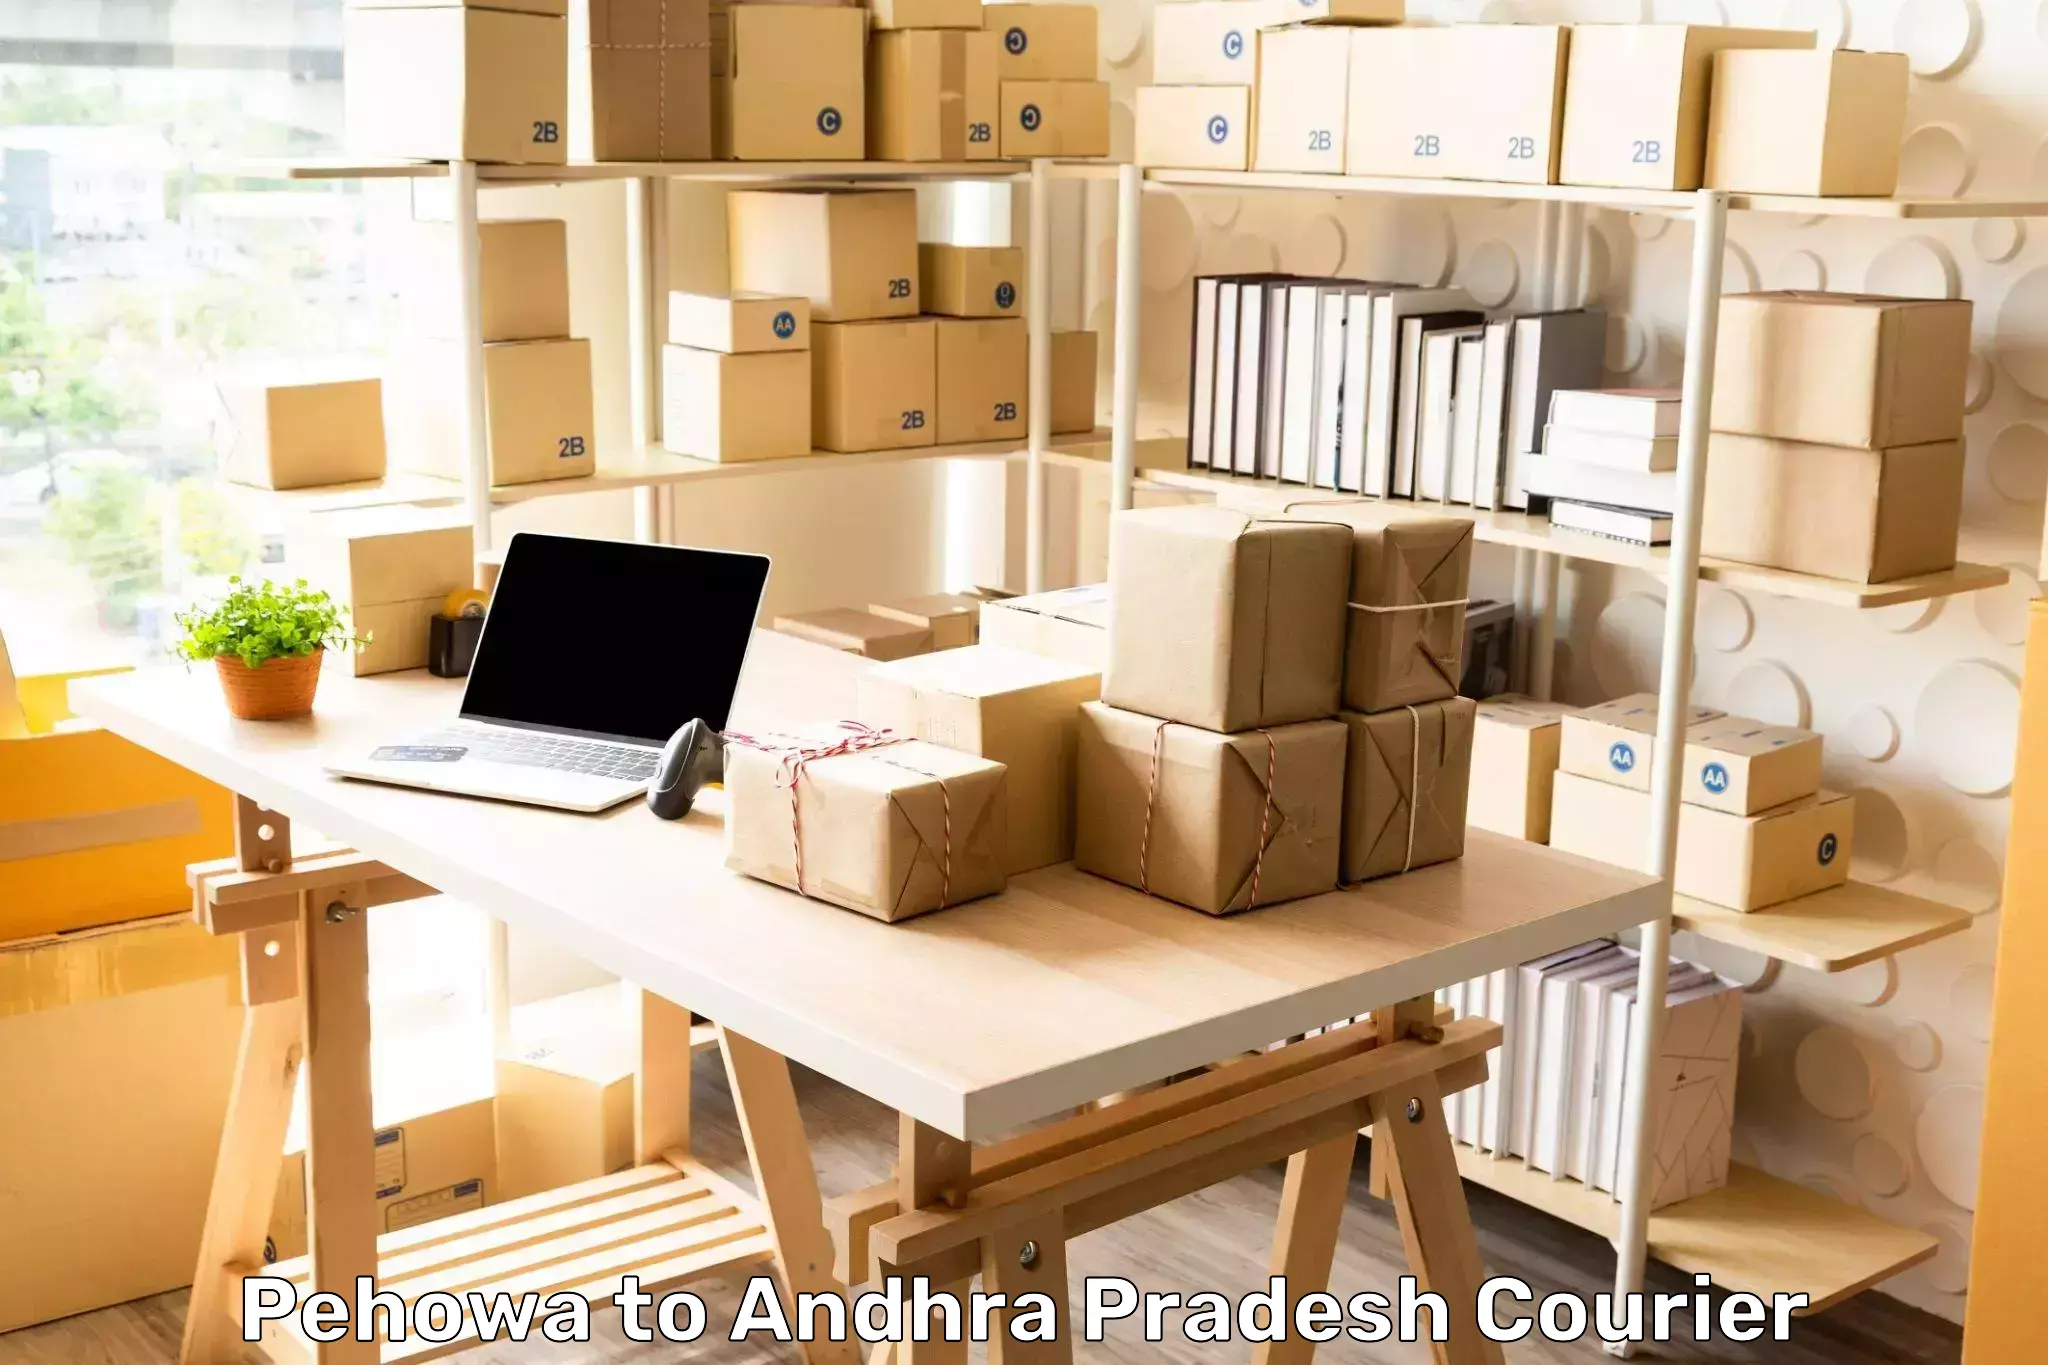 Parcel delivery automation Pehowa to Visakhapatnam Port